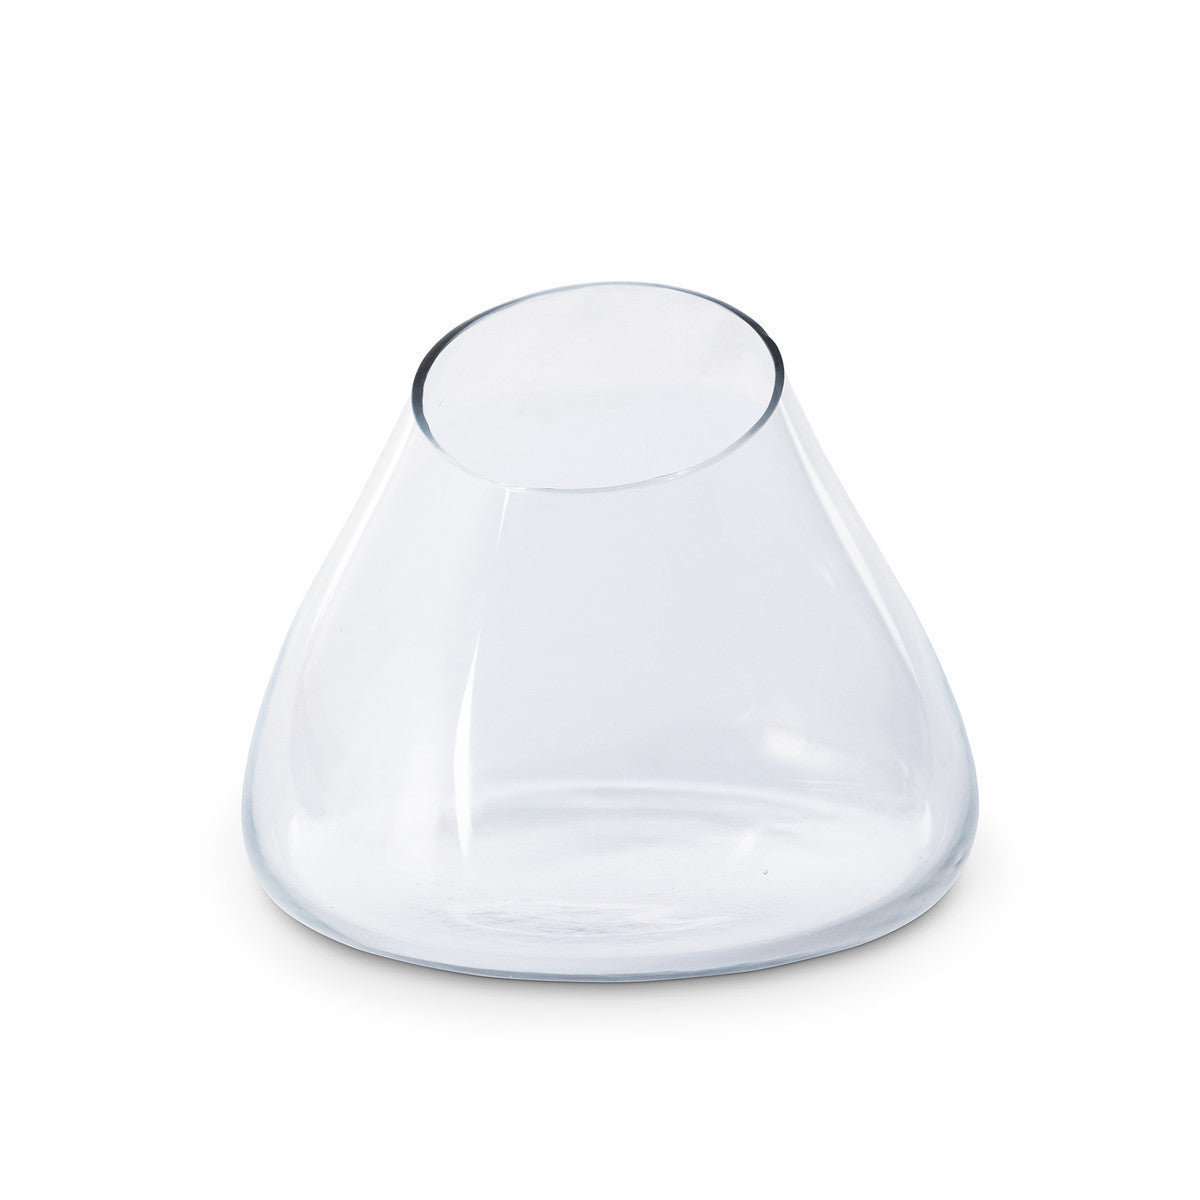 tear-drop-shaped-assymetrical-clear-glass-vase-on-white-background